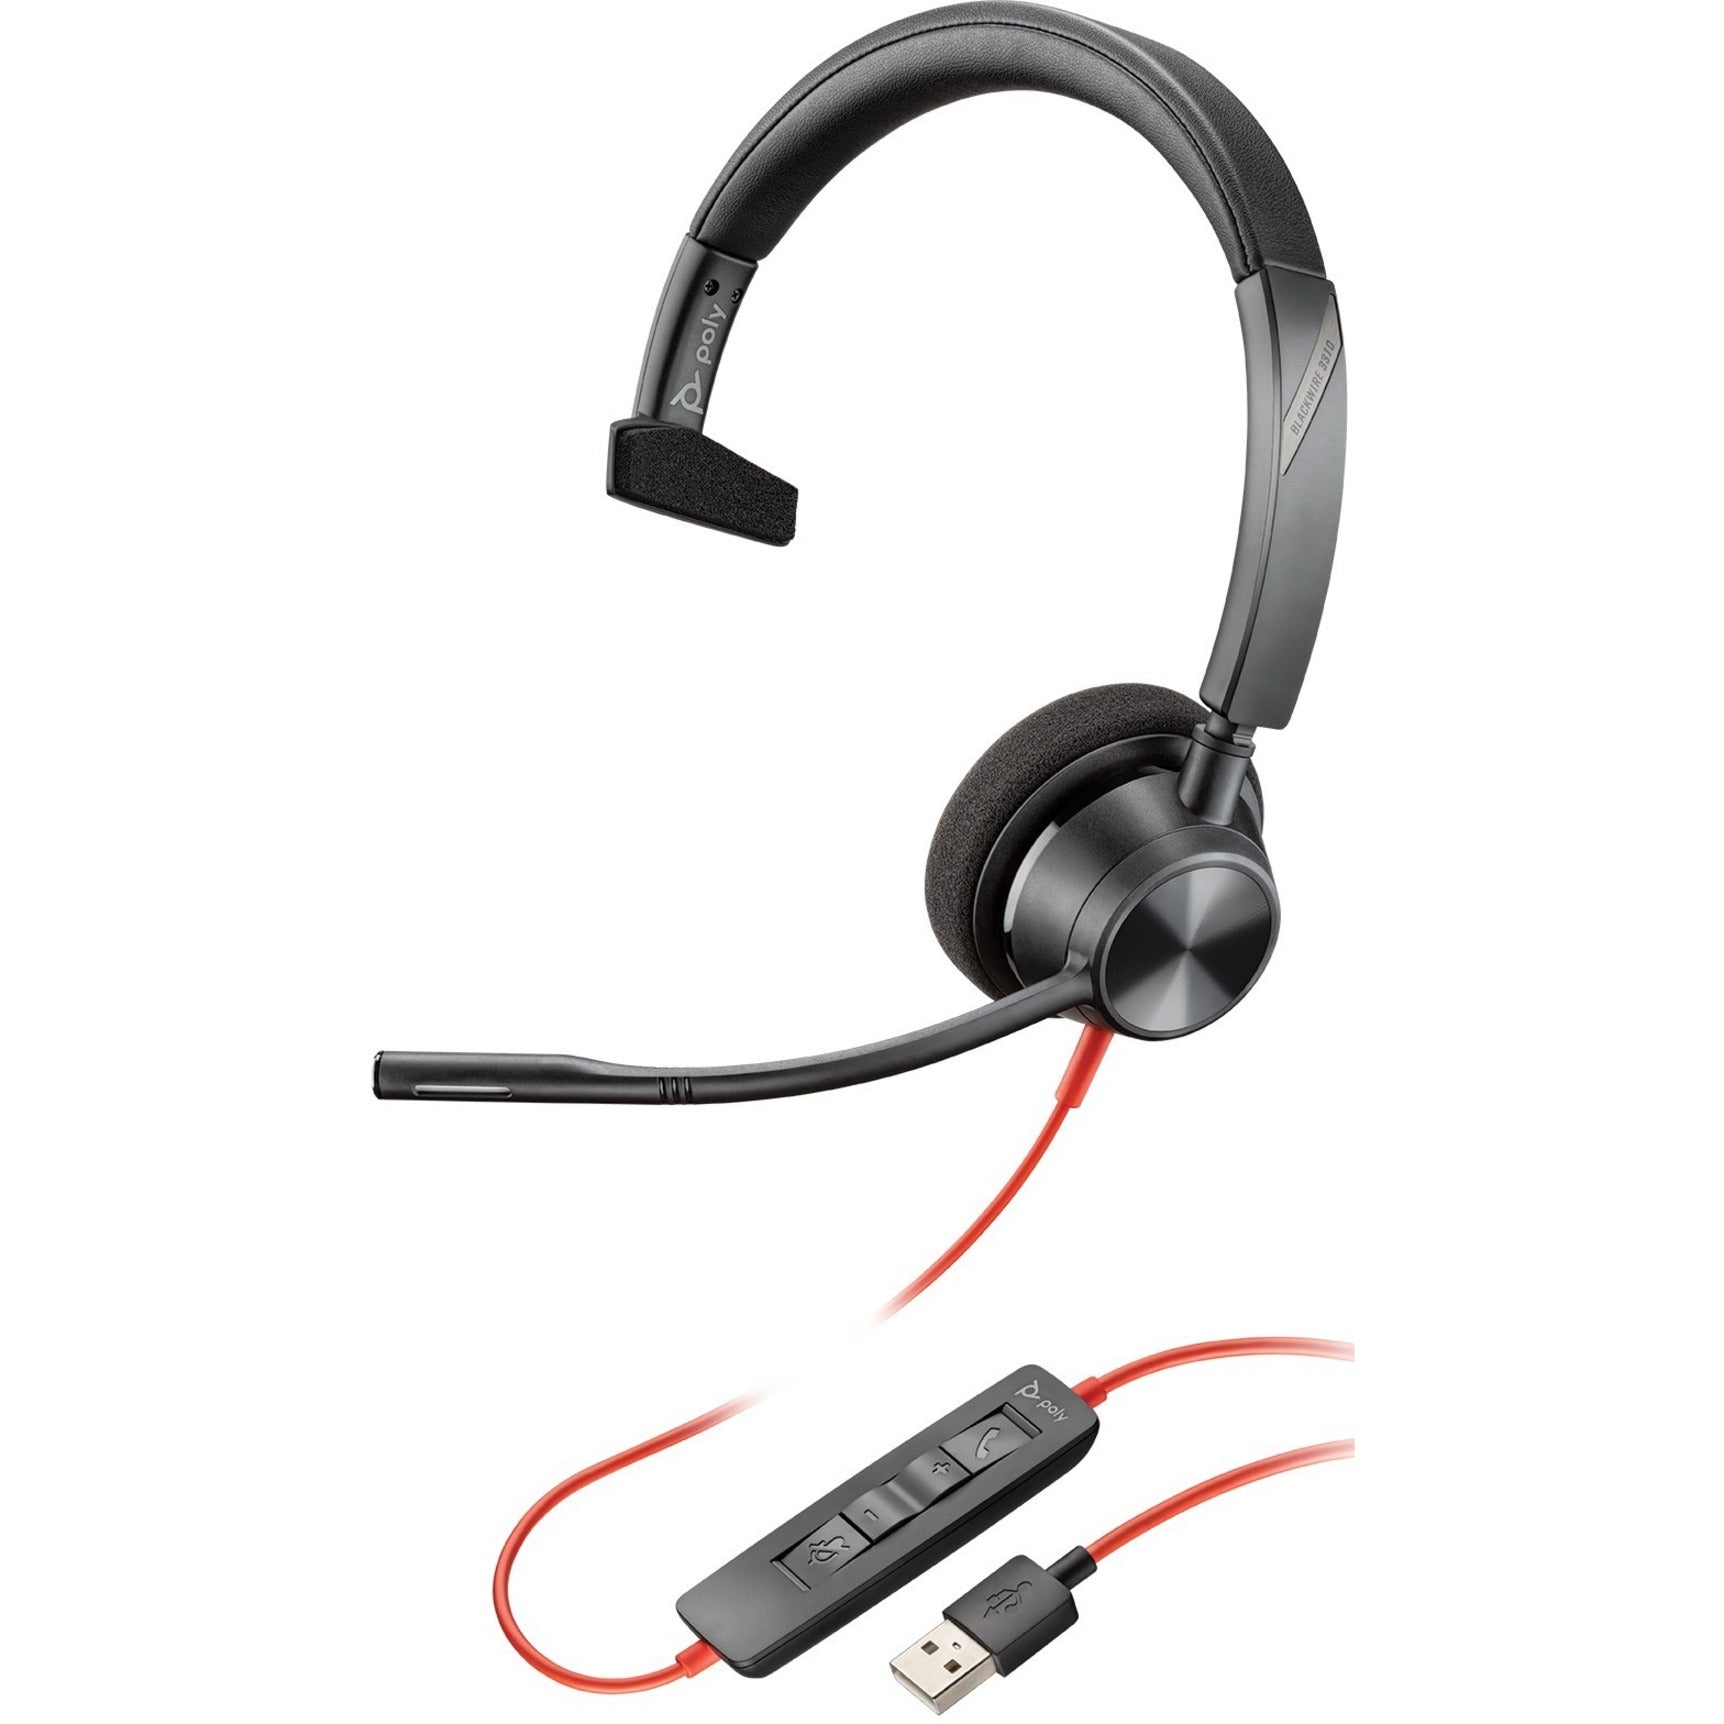 Plantronics 213929-101 Blackwire 3310 USB-C Headset, Monaural Over-the-head, Noise Cancelling, 2 Year Warranty